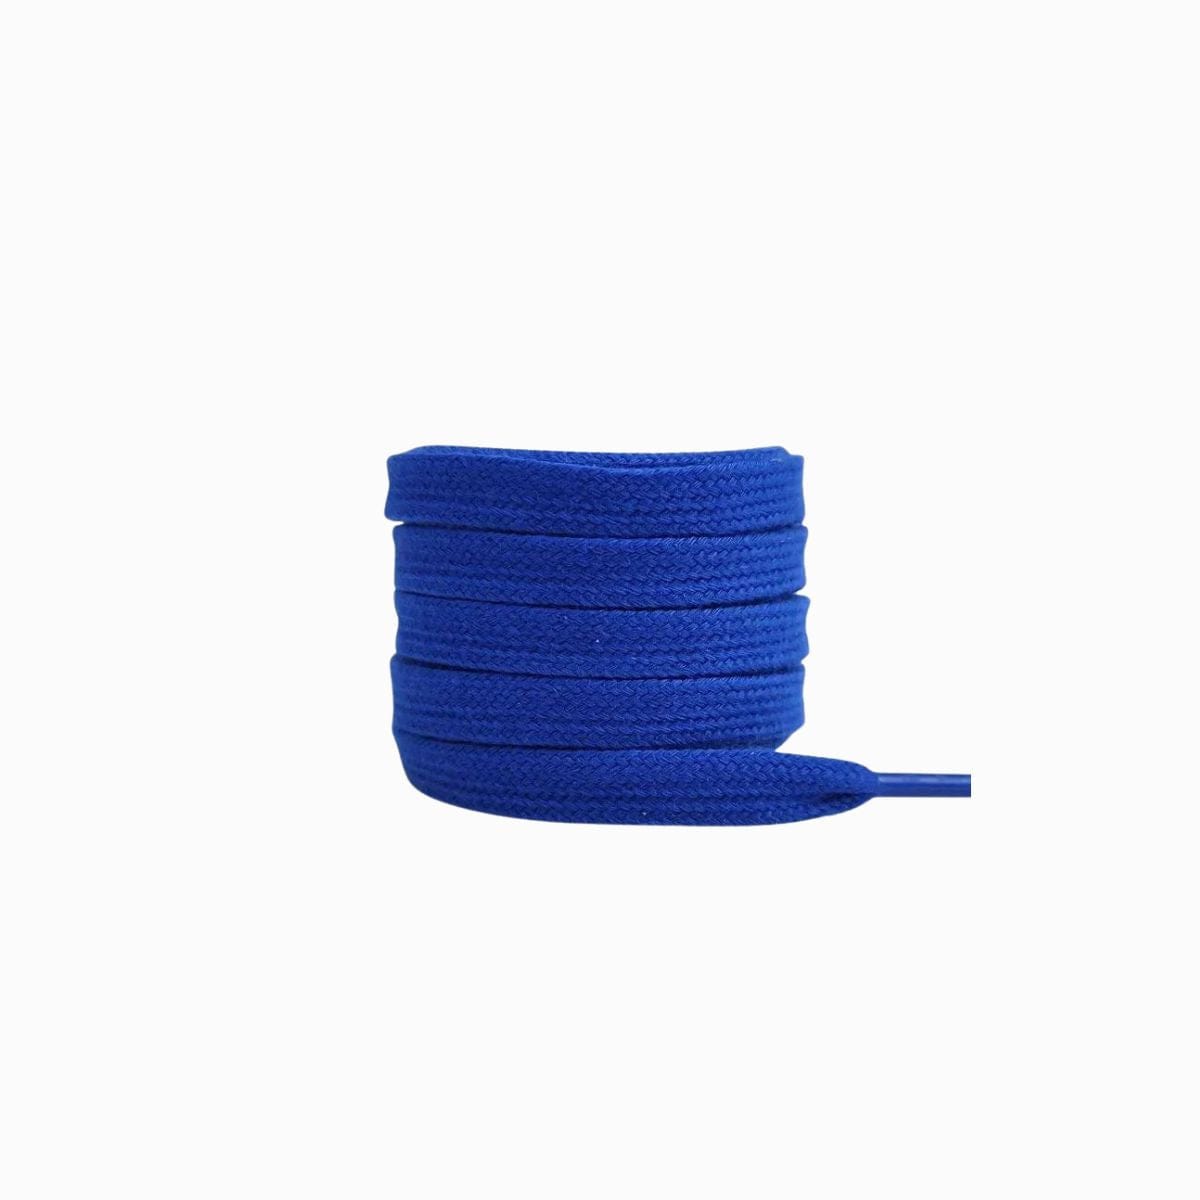 Royal Blue Replacement Adidas Shoe Laces for Adidas Samba ADV Sneakers by Kicks Shoelaces